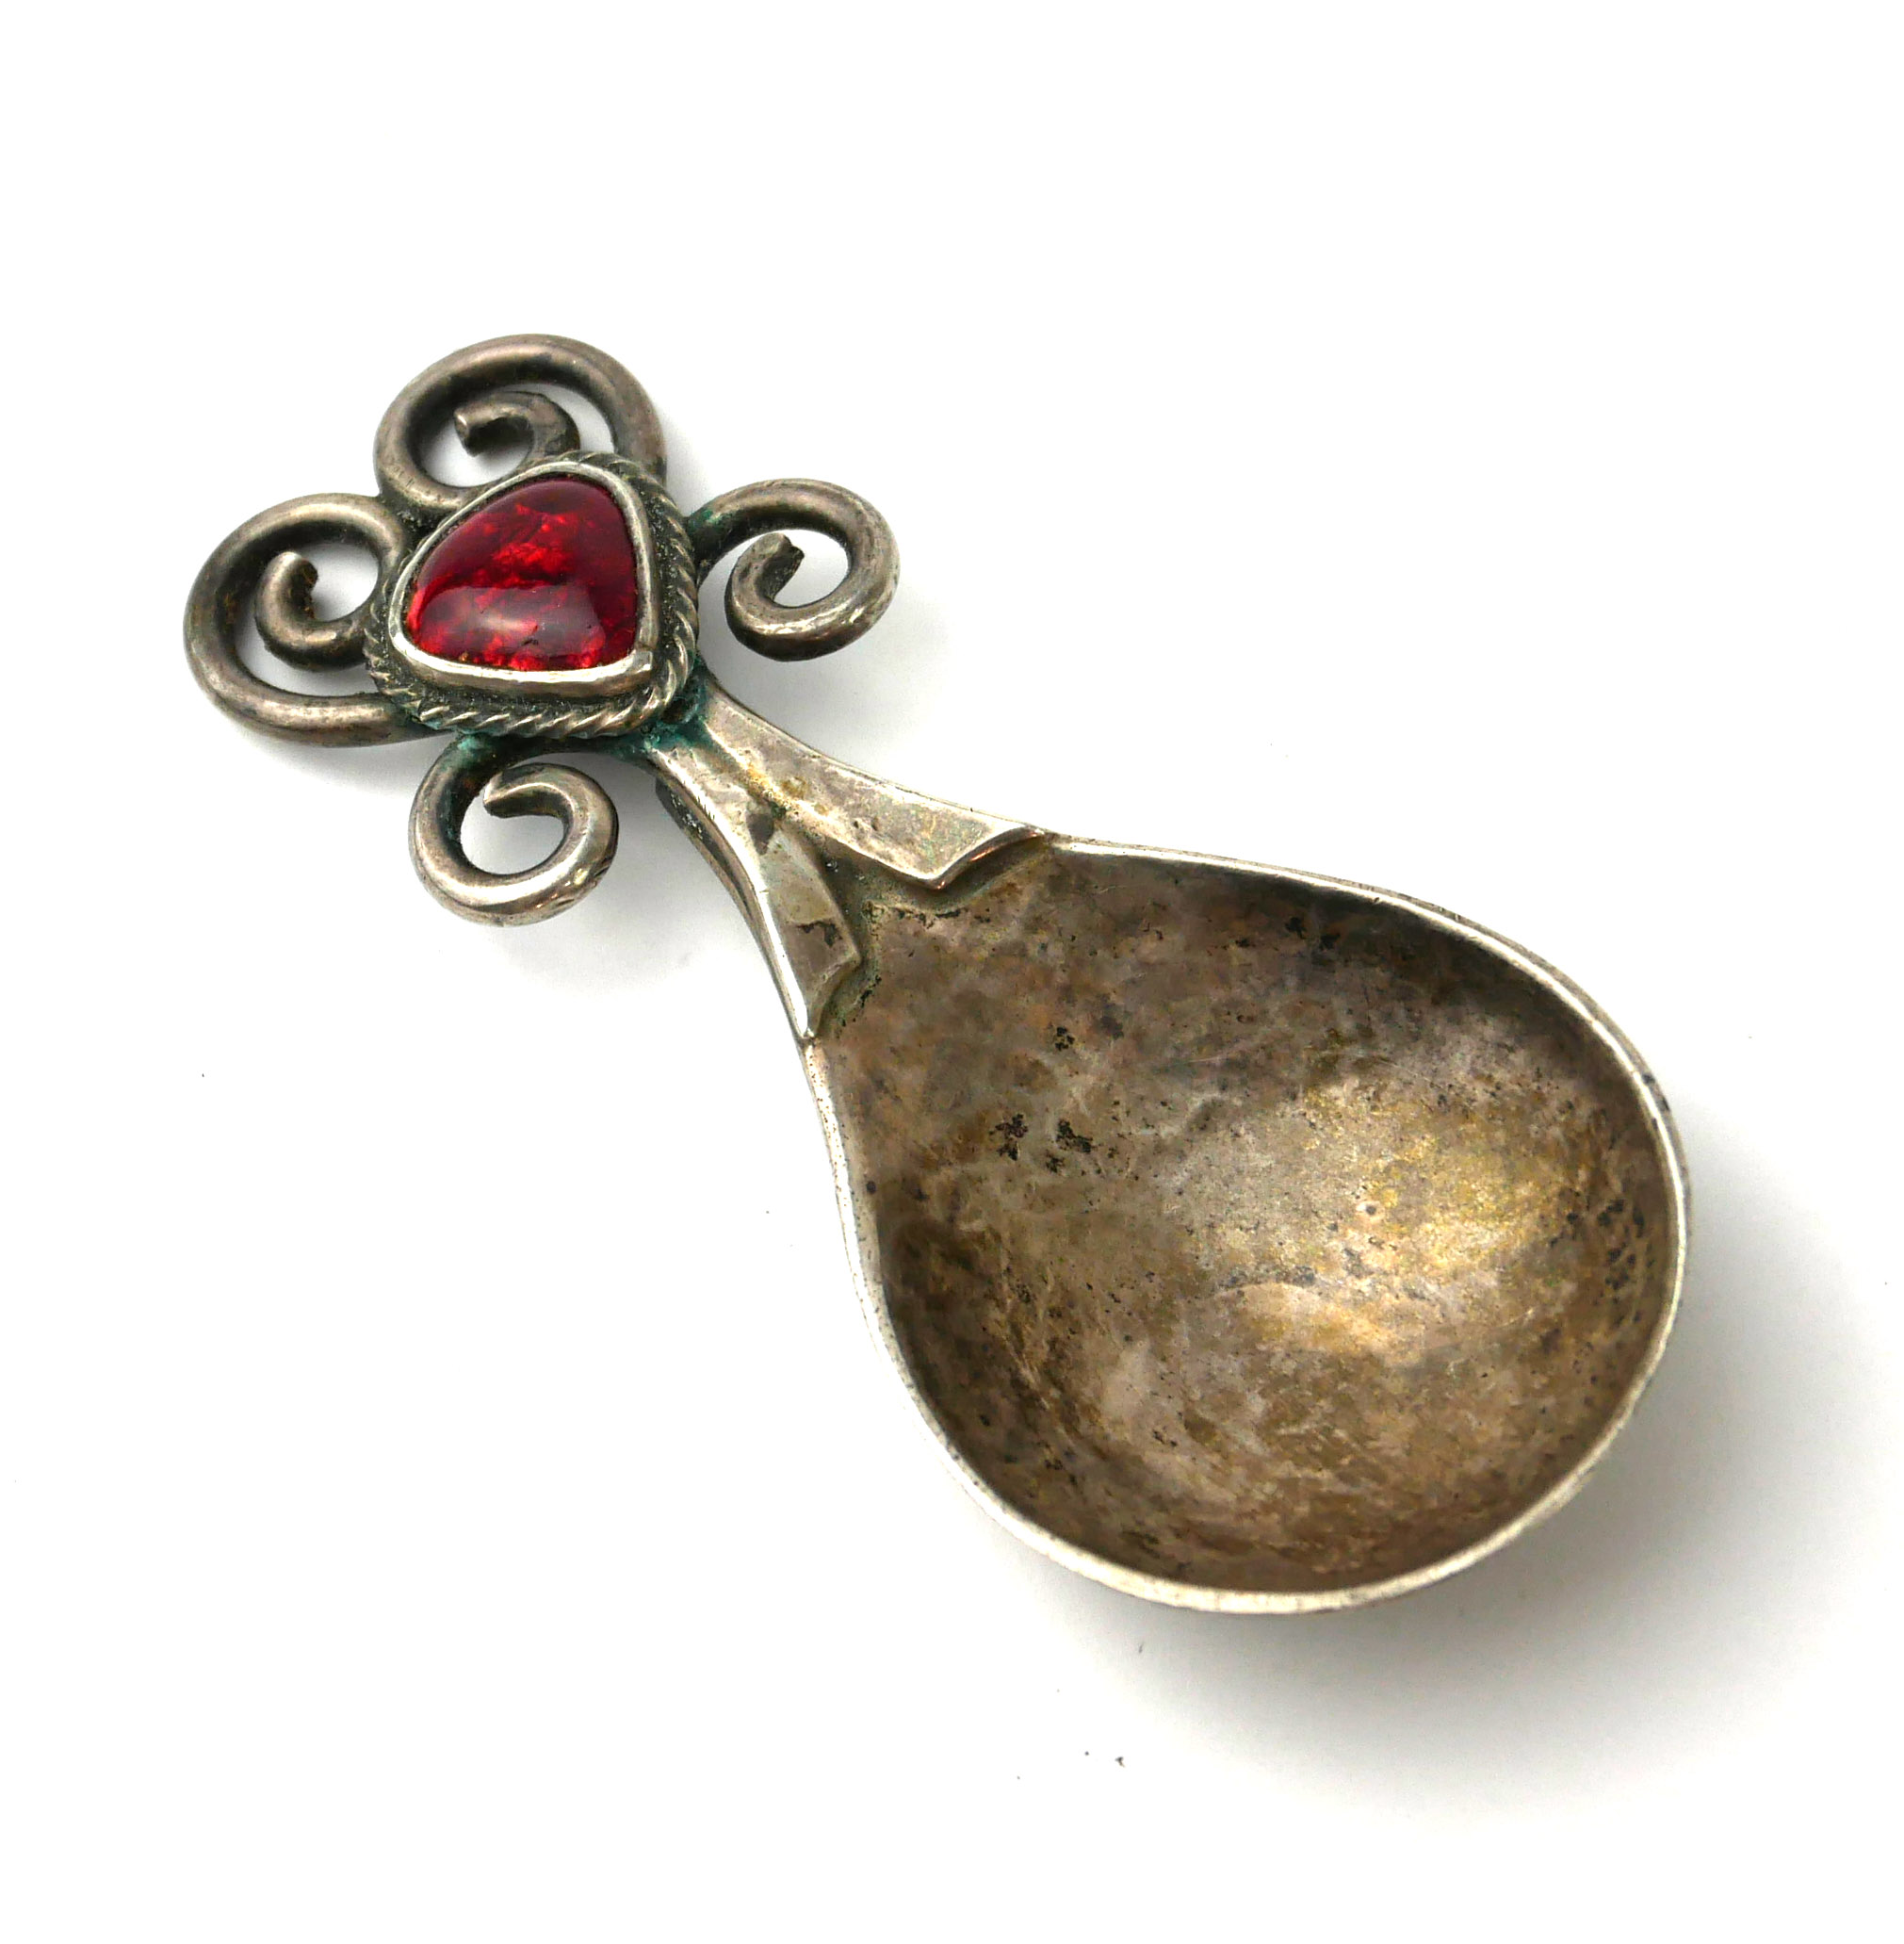 OMAR RAMSDEN, AN EARLY 20TH CENTURY SILVER AND ENAMEL CADDY SPOON Having red enamel finial and